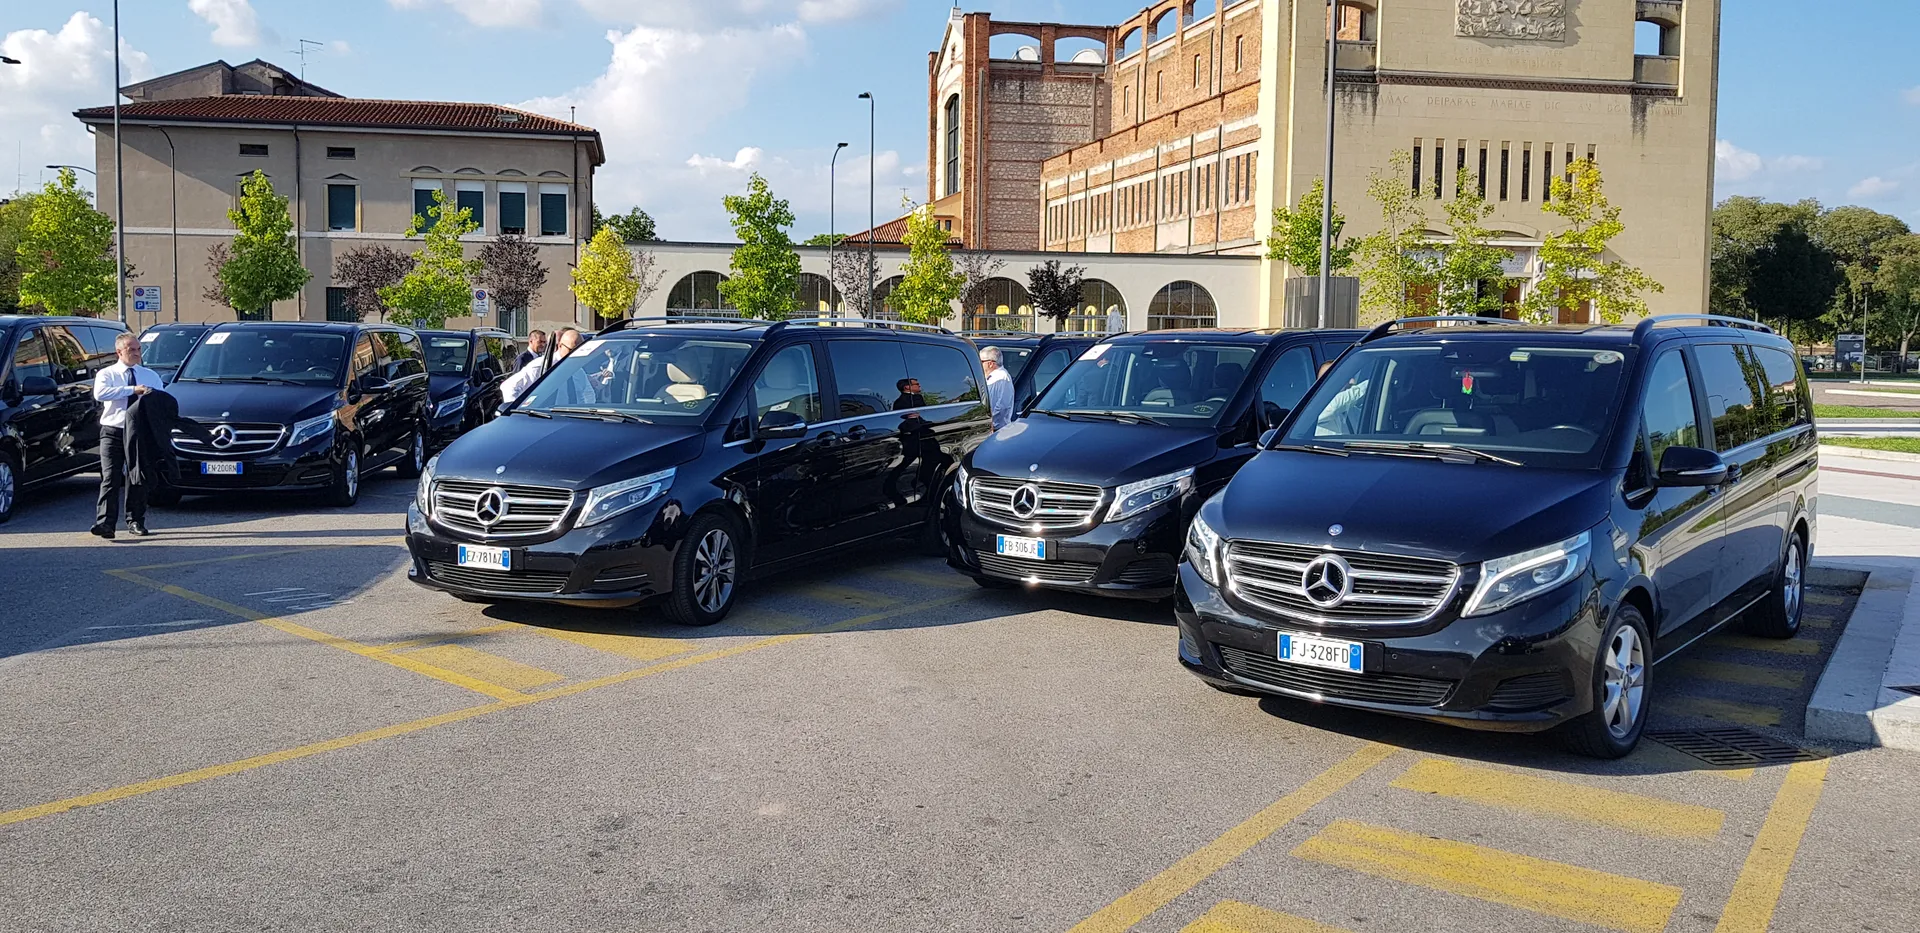 Many minivans for transfers from Venice airport